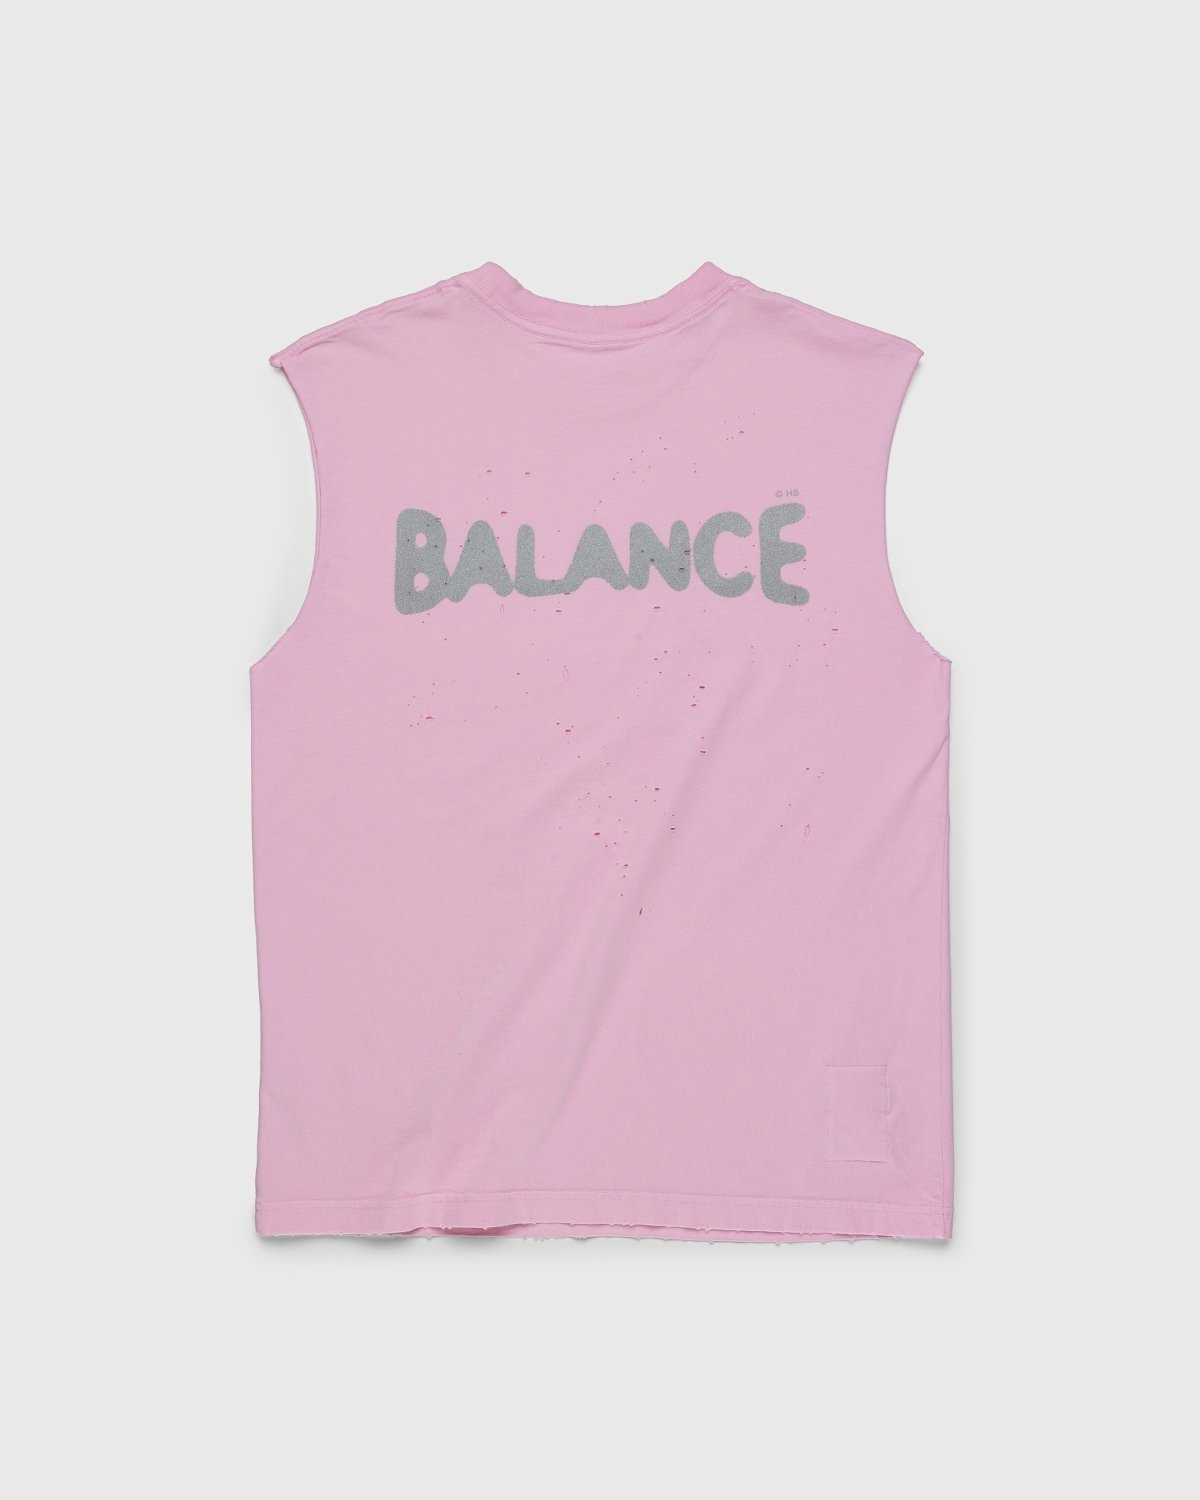 Satisfy x Highsnobiety – HS Sports Balance Muscle Tee Pink - T-shirts - Pink - Image 2